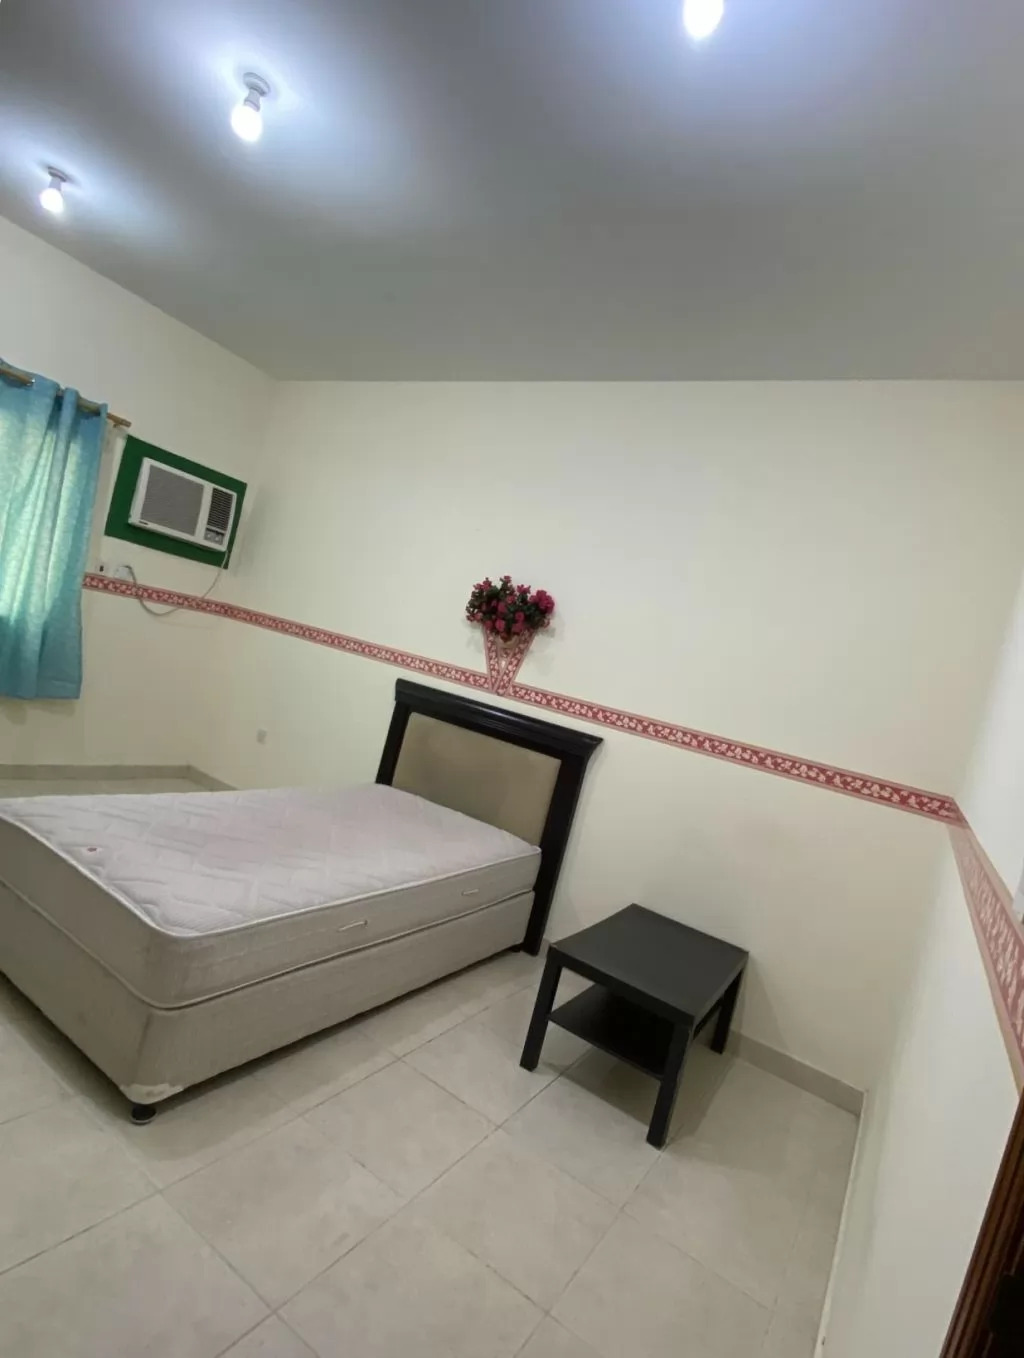 Residential Property 3 Bedrooms F/F Staff Accommodation  for rent in Doha-Qatar #20089 - 1  image 